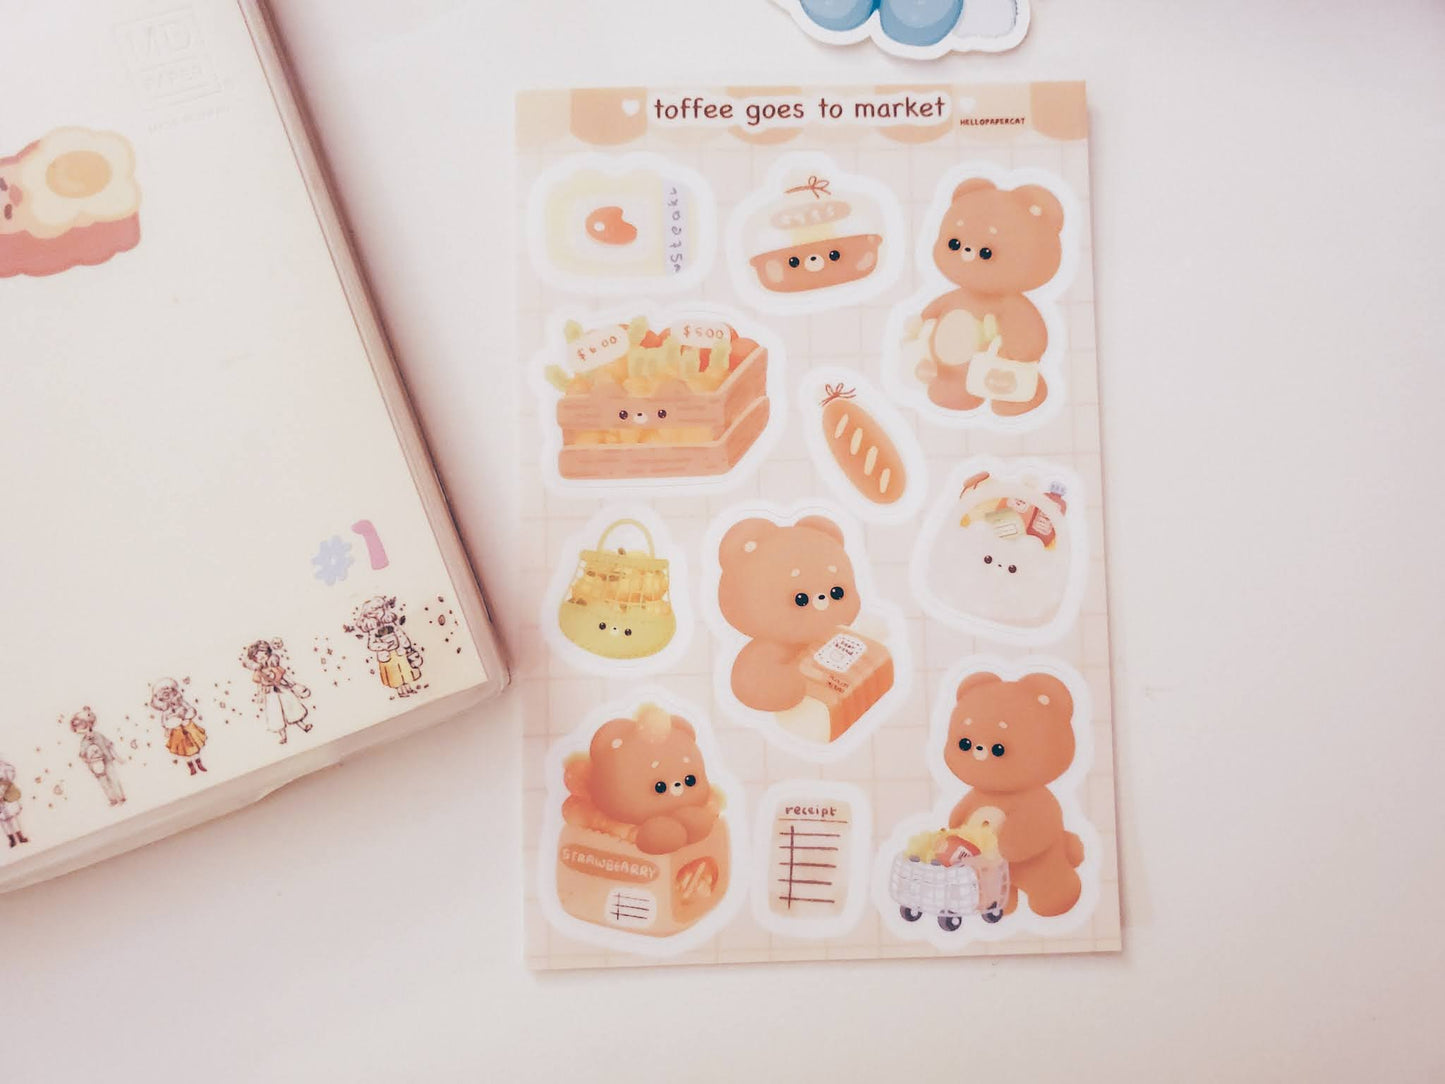 Toffee goes the to the market Vinyl Sticker sheet